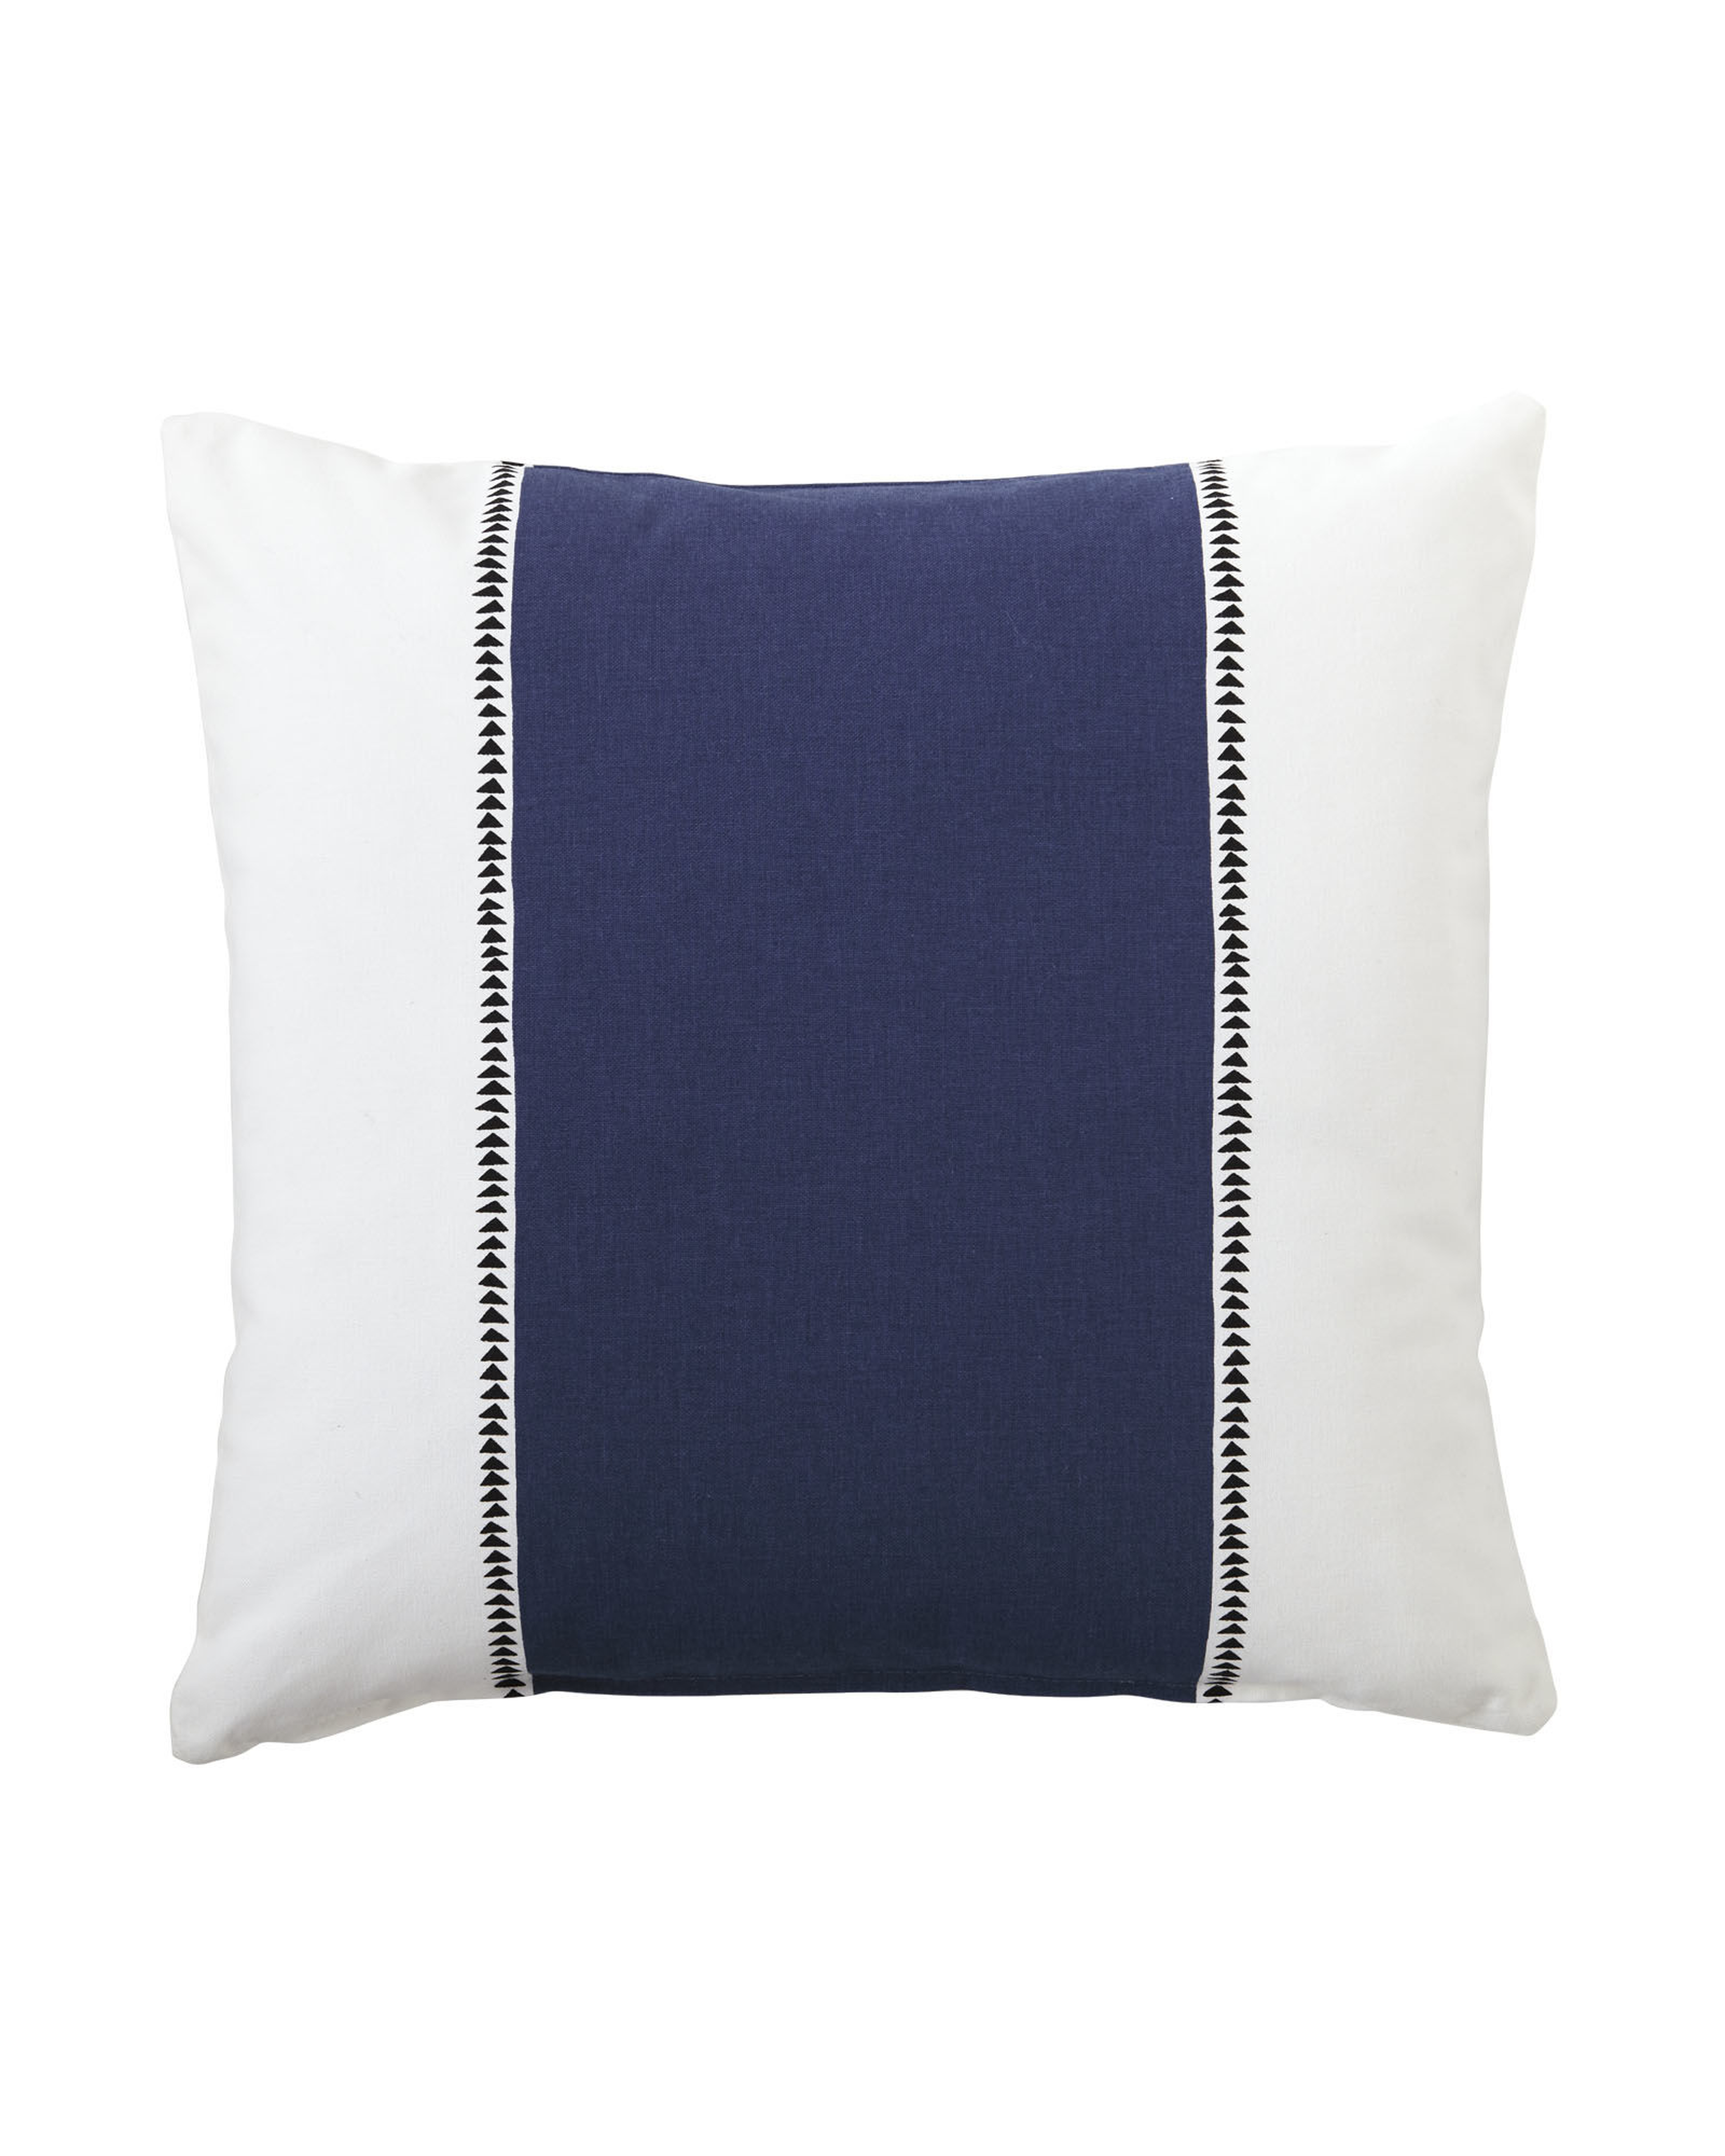 Racing Stripe Pillow Cover Navy, 20"x20"- No Insert - Serena and Lily